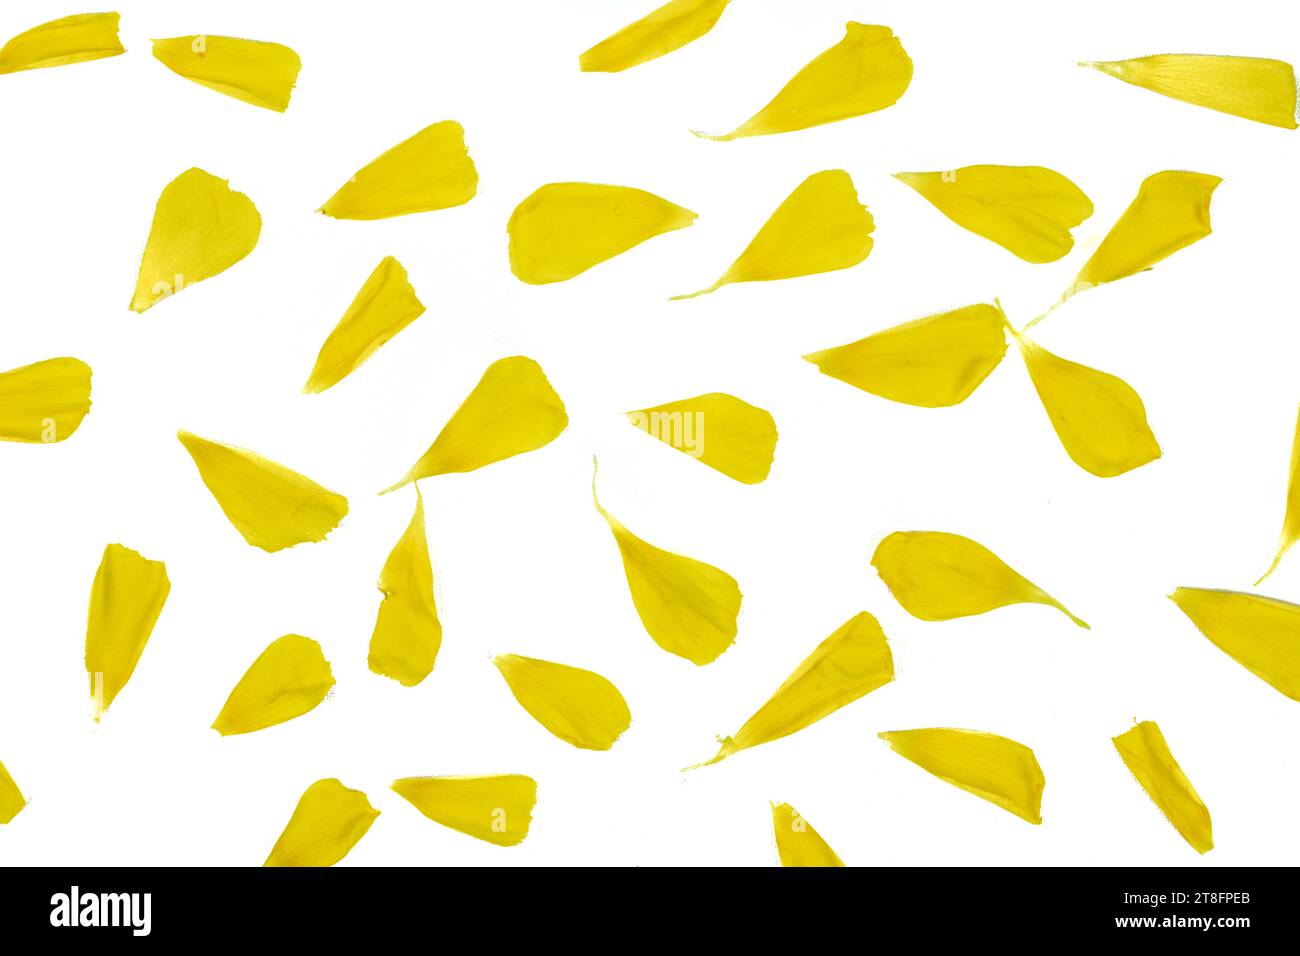 Damiana or Turnera diffusa flower petals on a white background Stock Photo